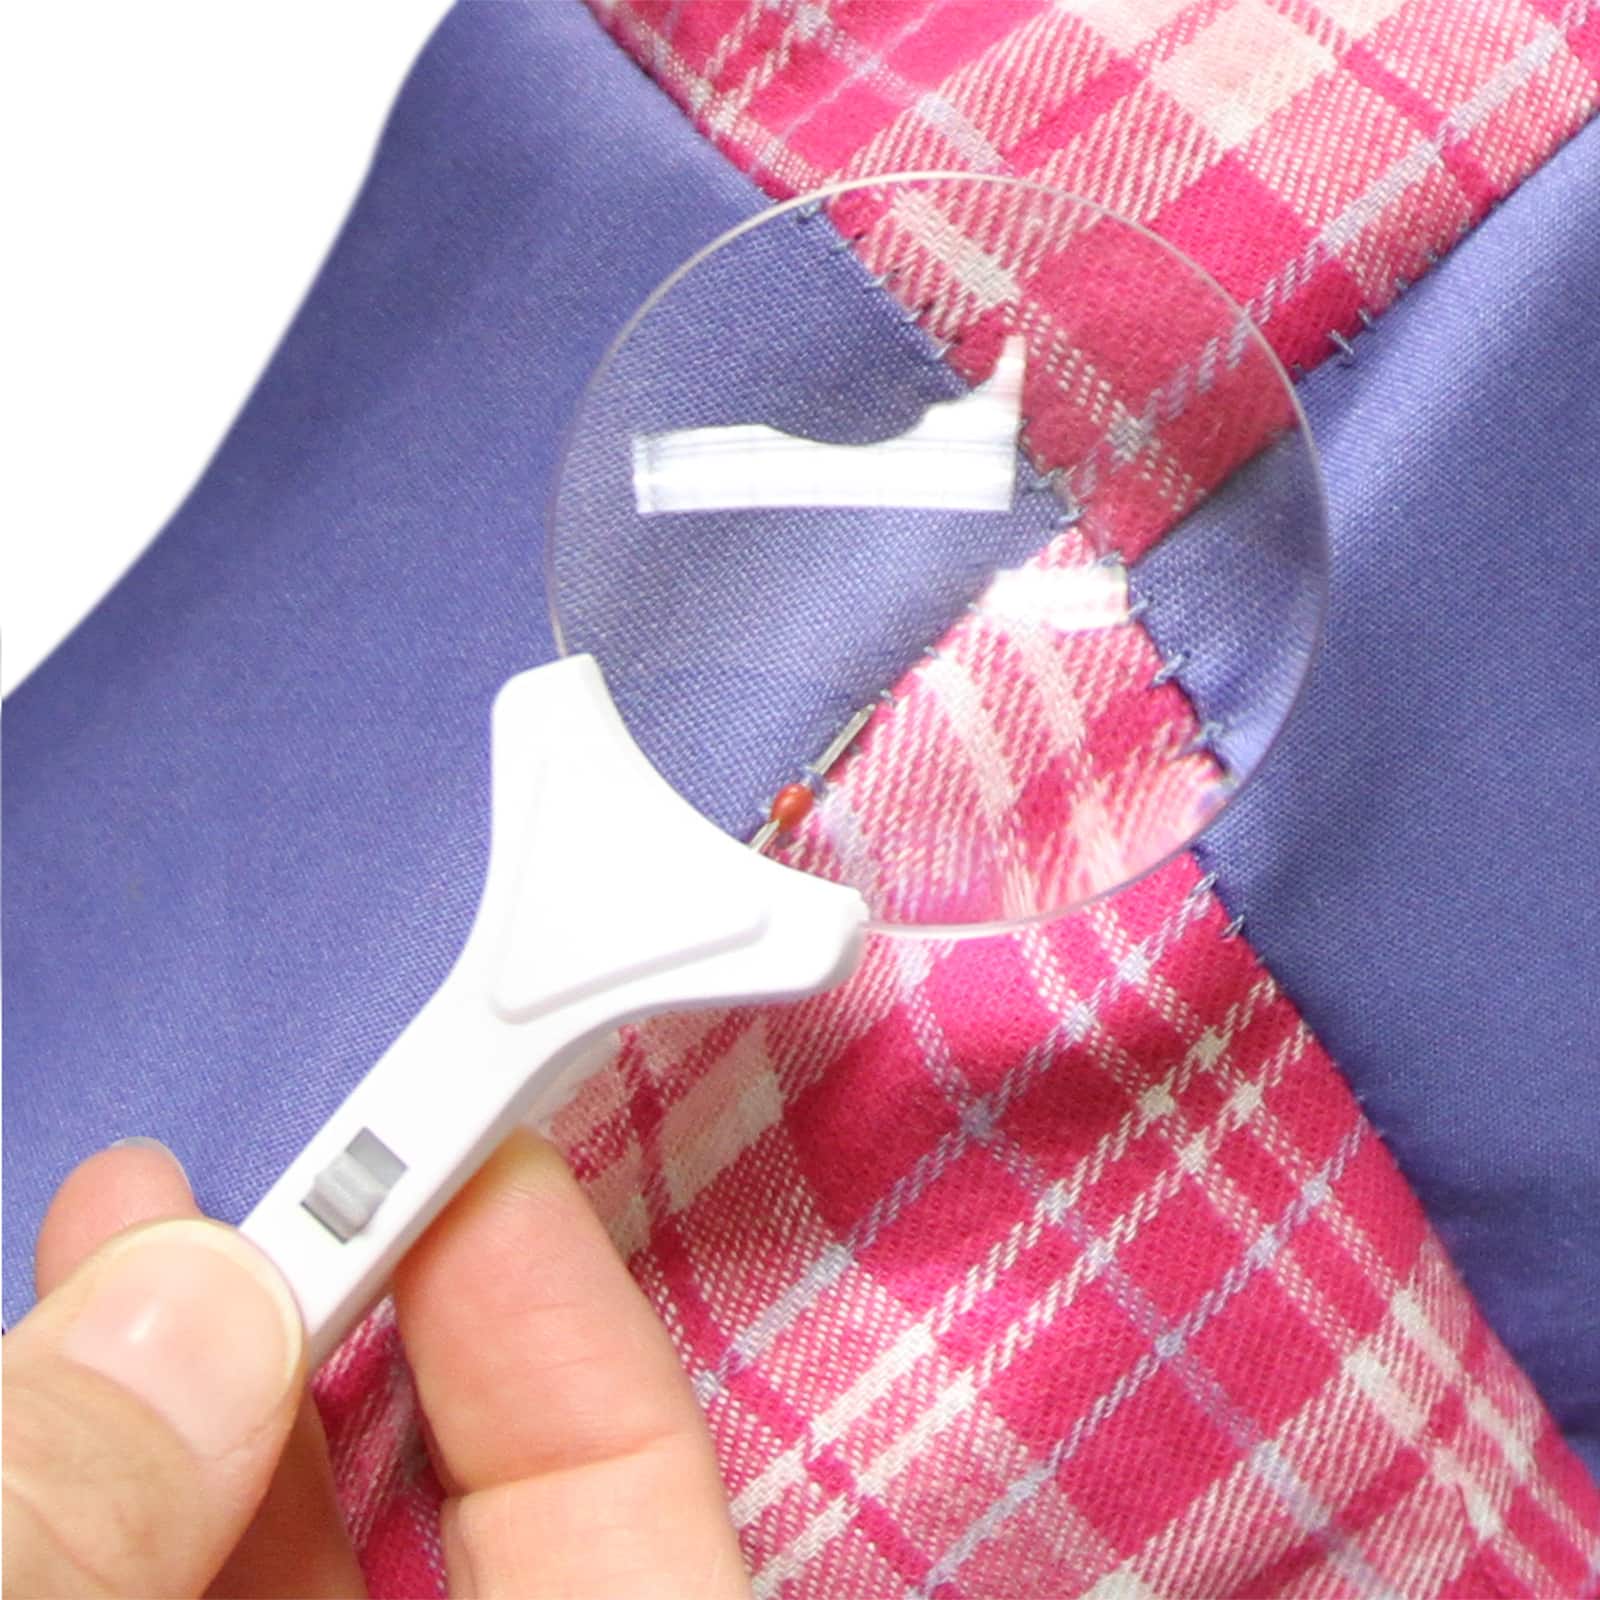 OttLite Seam Ripper with LED Magnifier